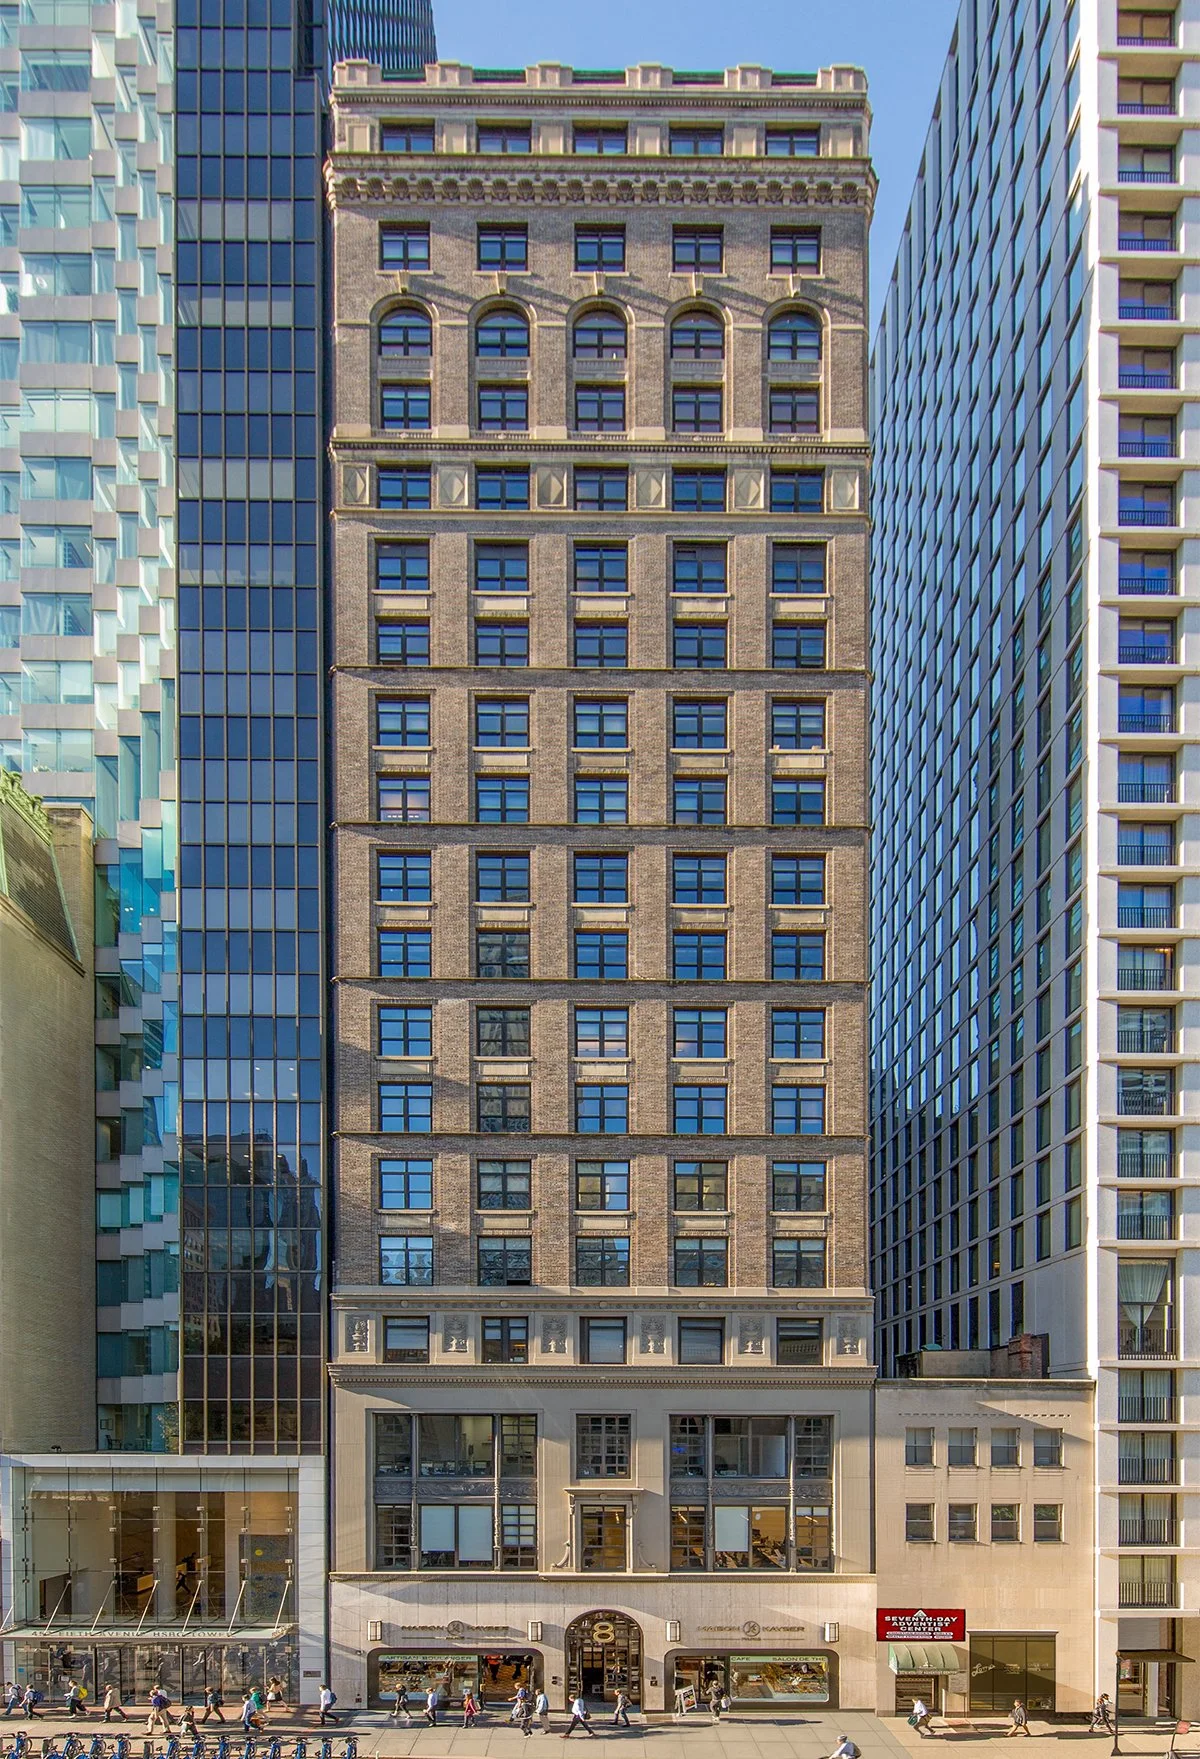 View of the exterior of 8 West 40th Street.